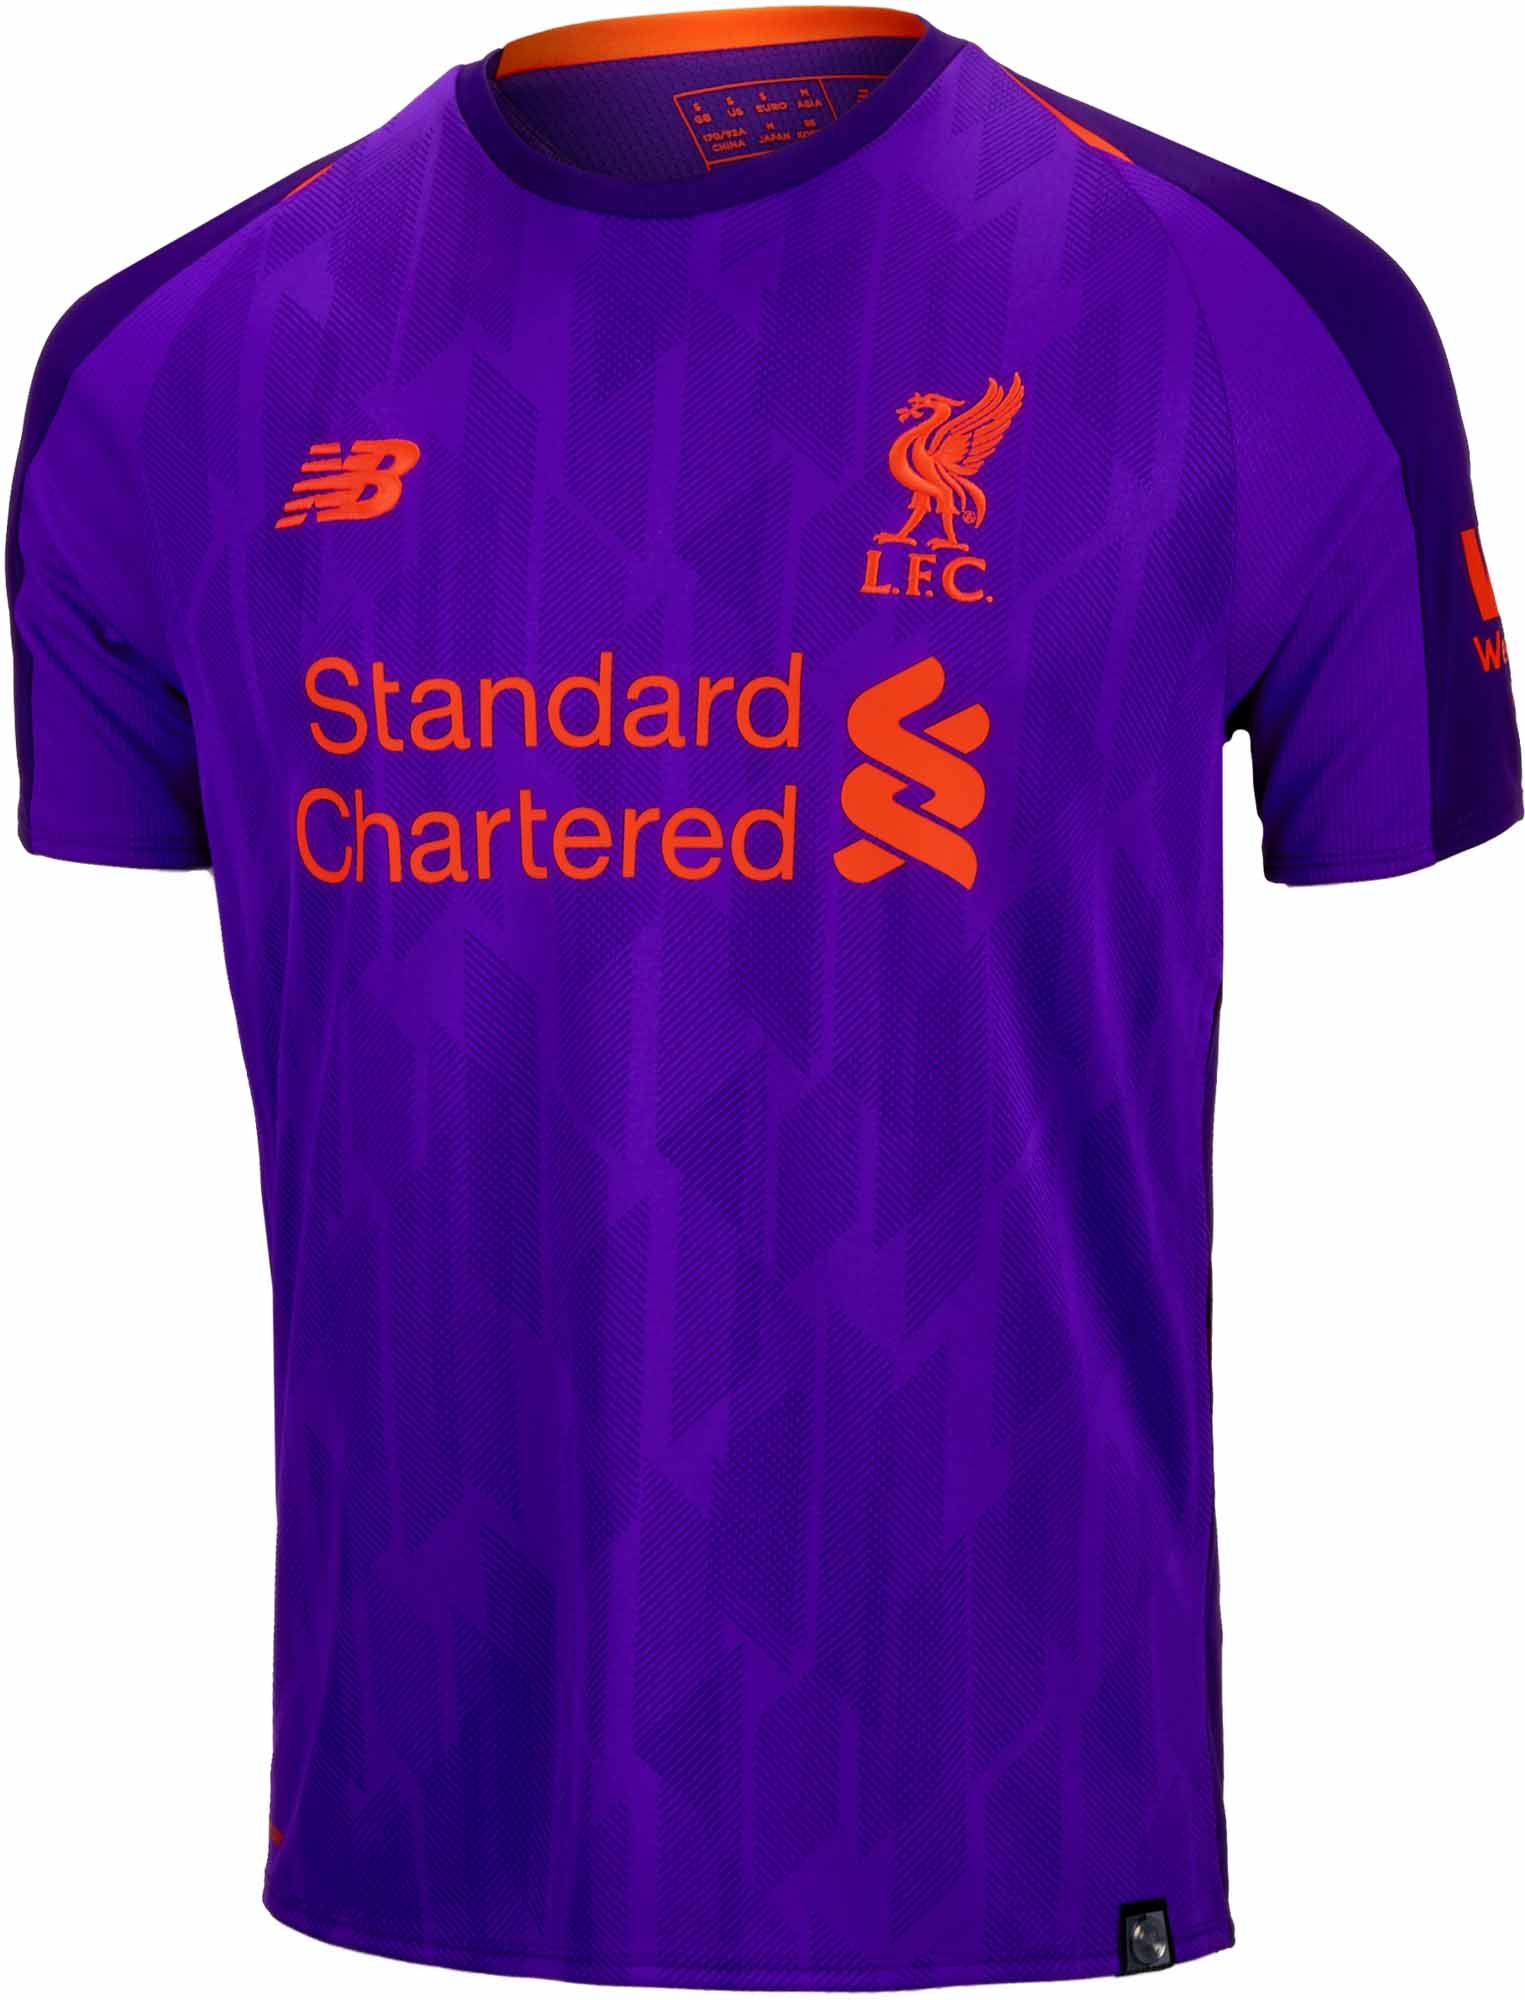 new liverpool away jersey